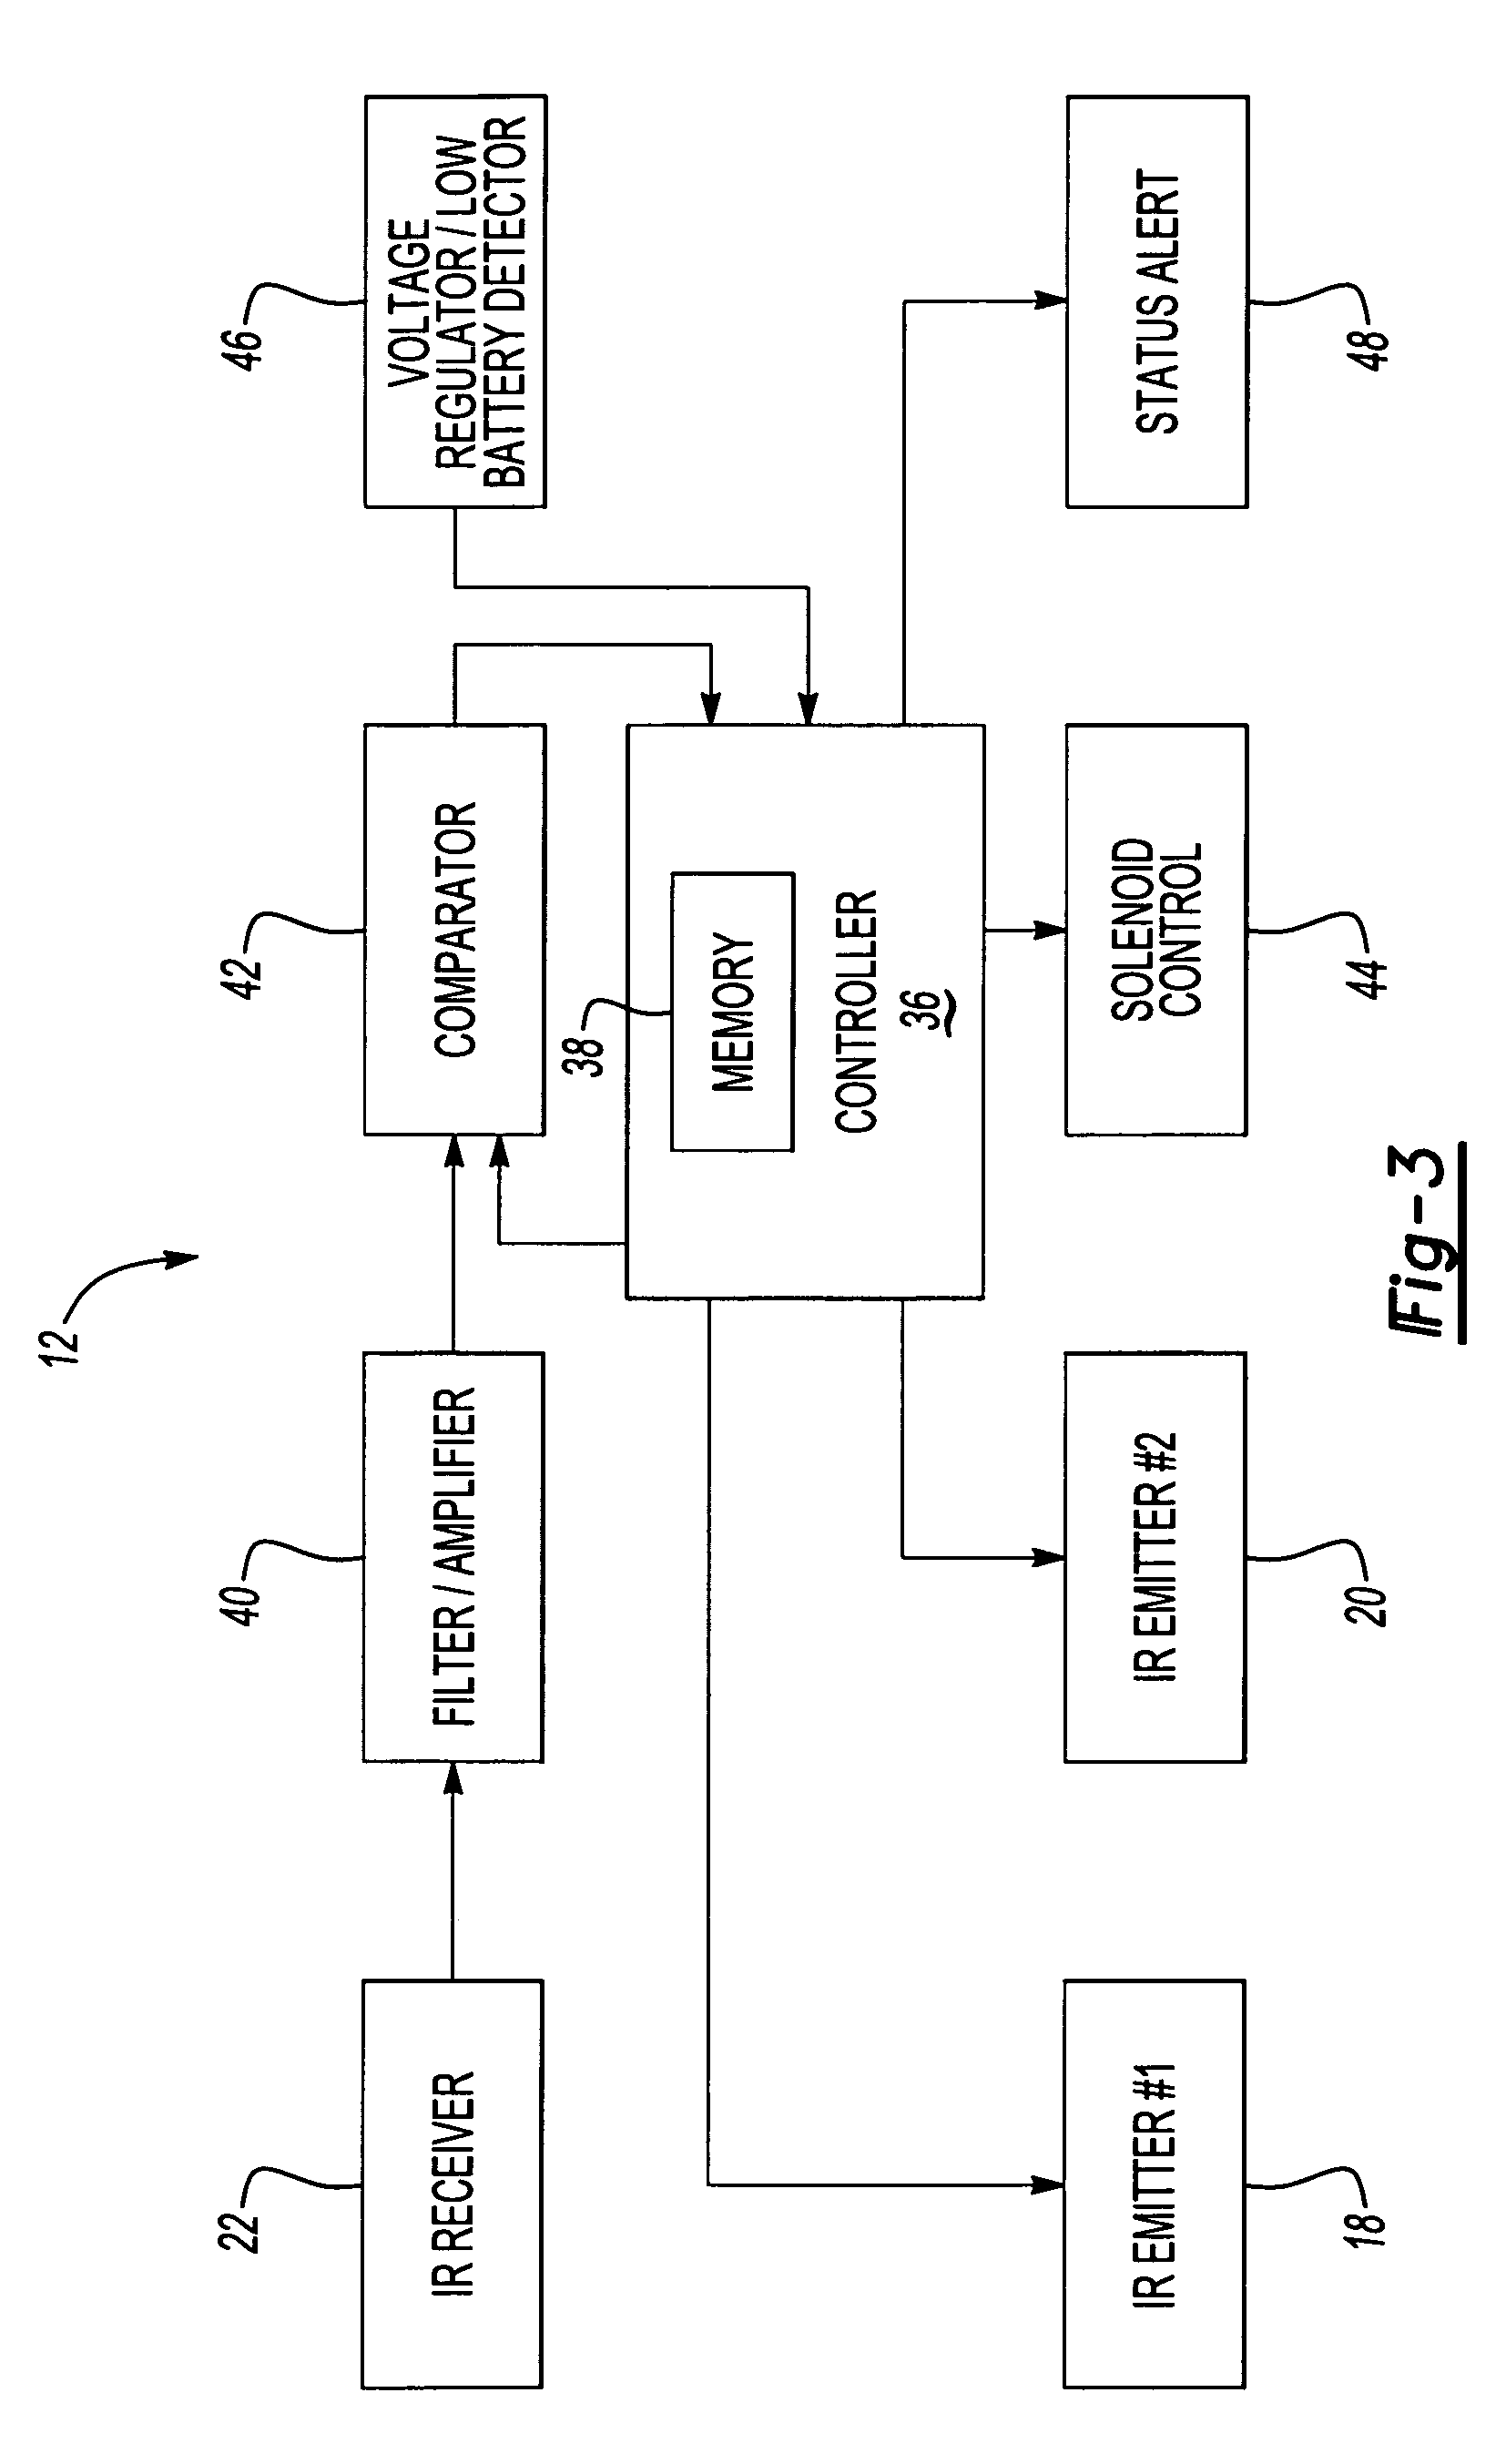 Control for an automatic plumbing device